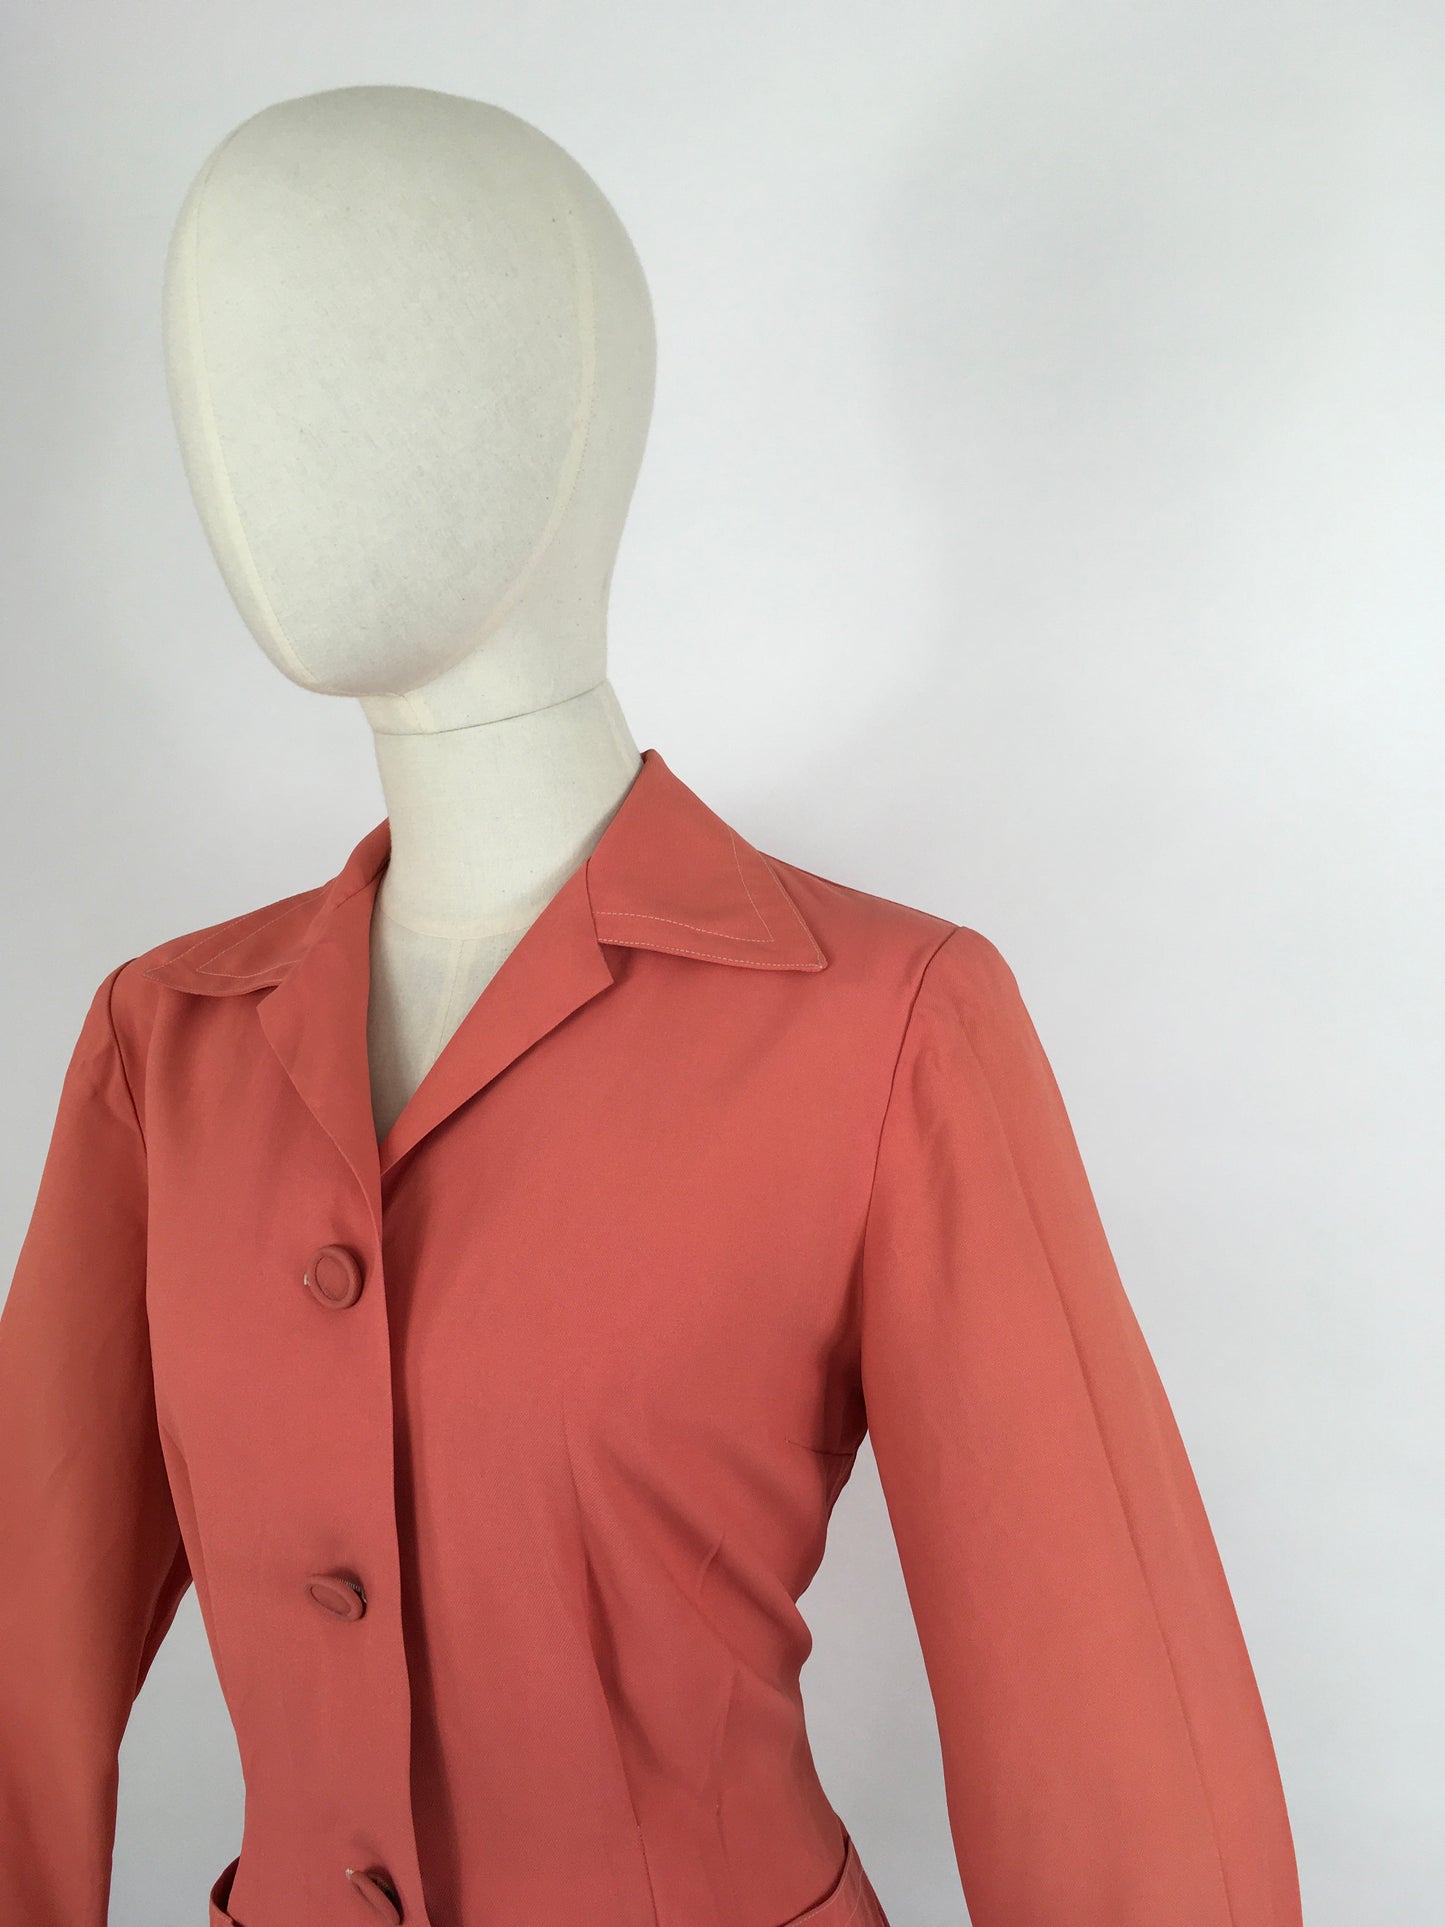 Original 1940s  Summer Jacket With Back Belt Detailing  - In A Fabulous Coral Colour ‘ A Bobby Ann Original’